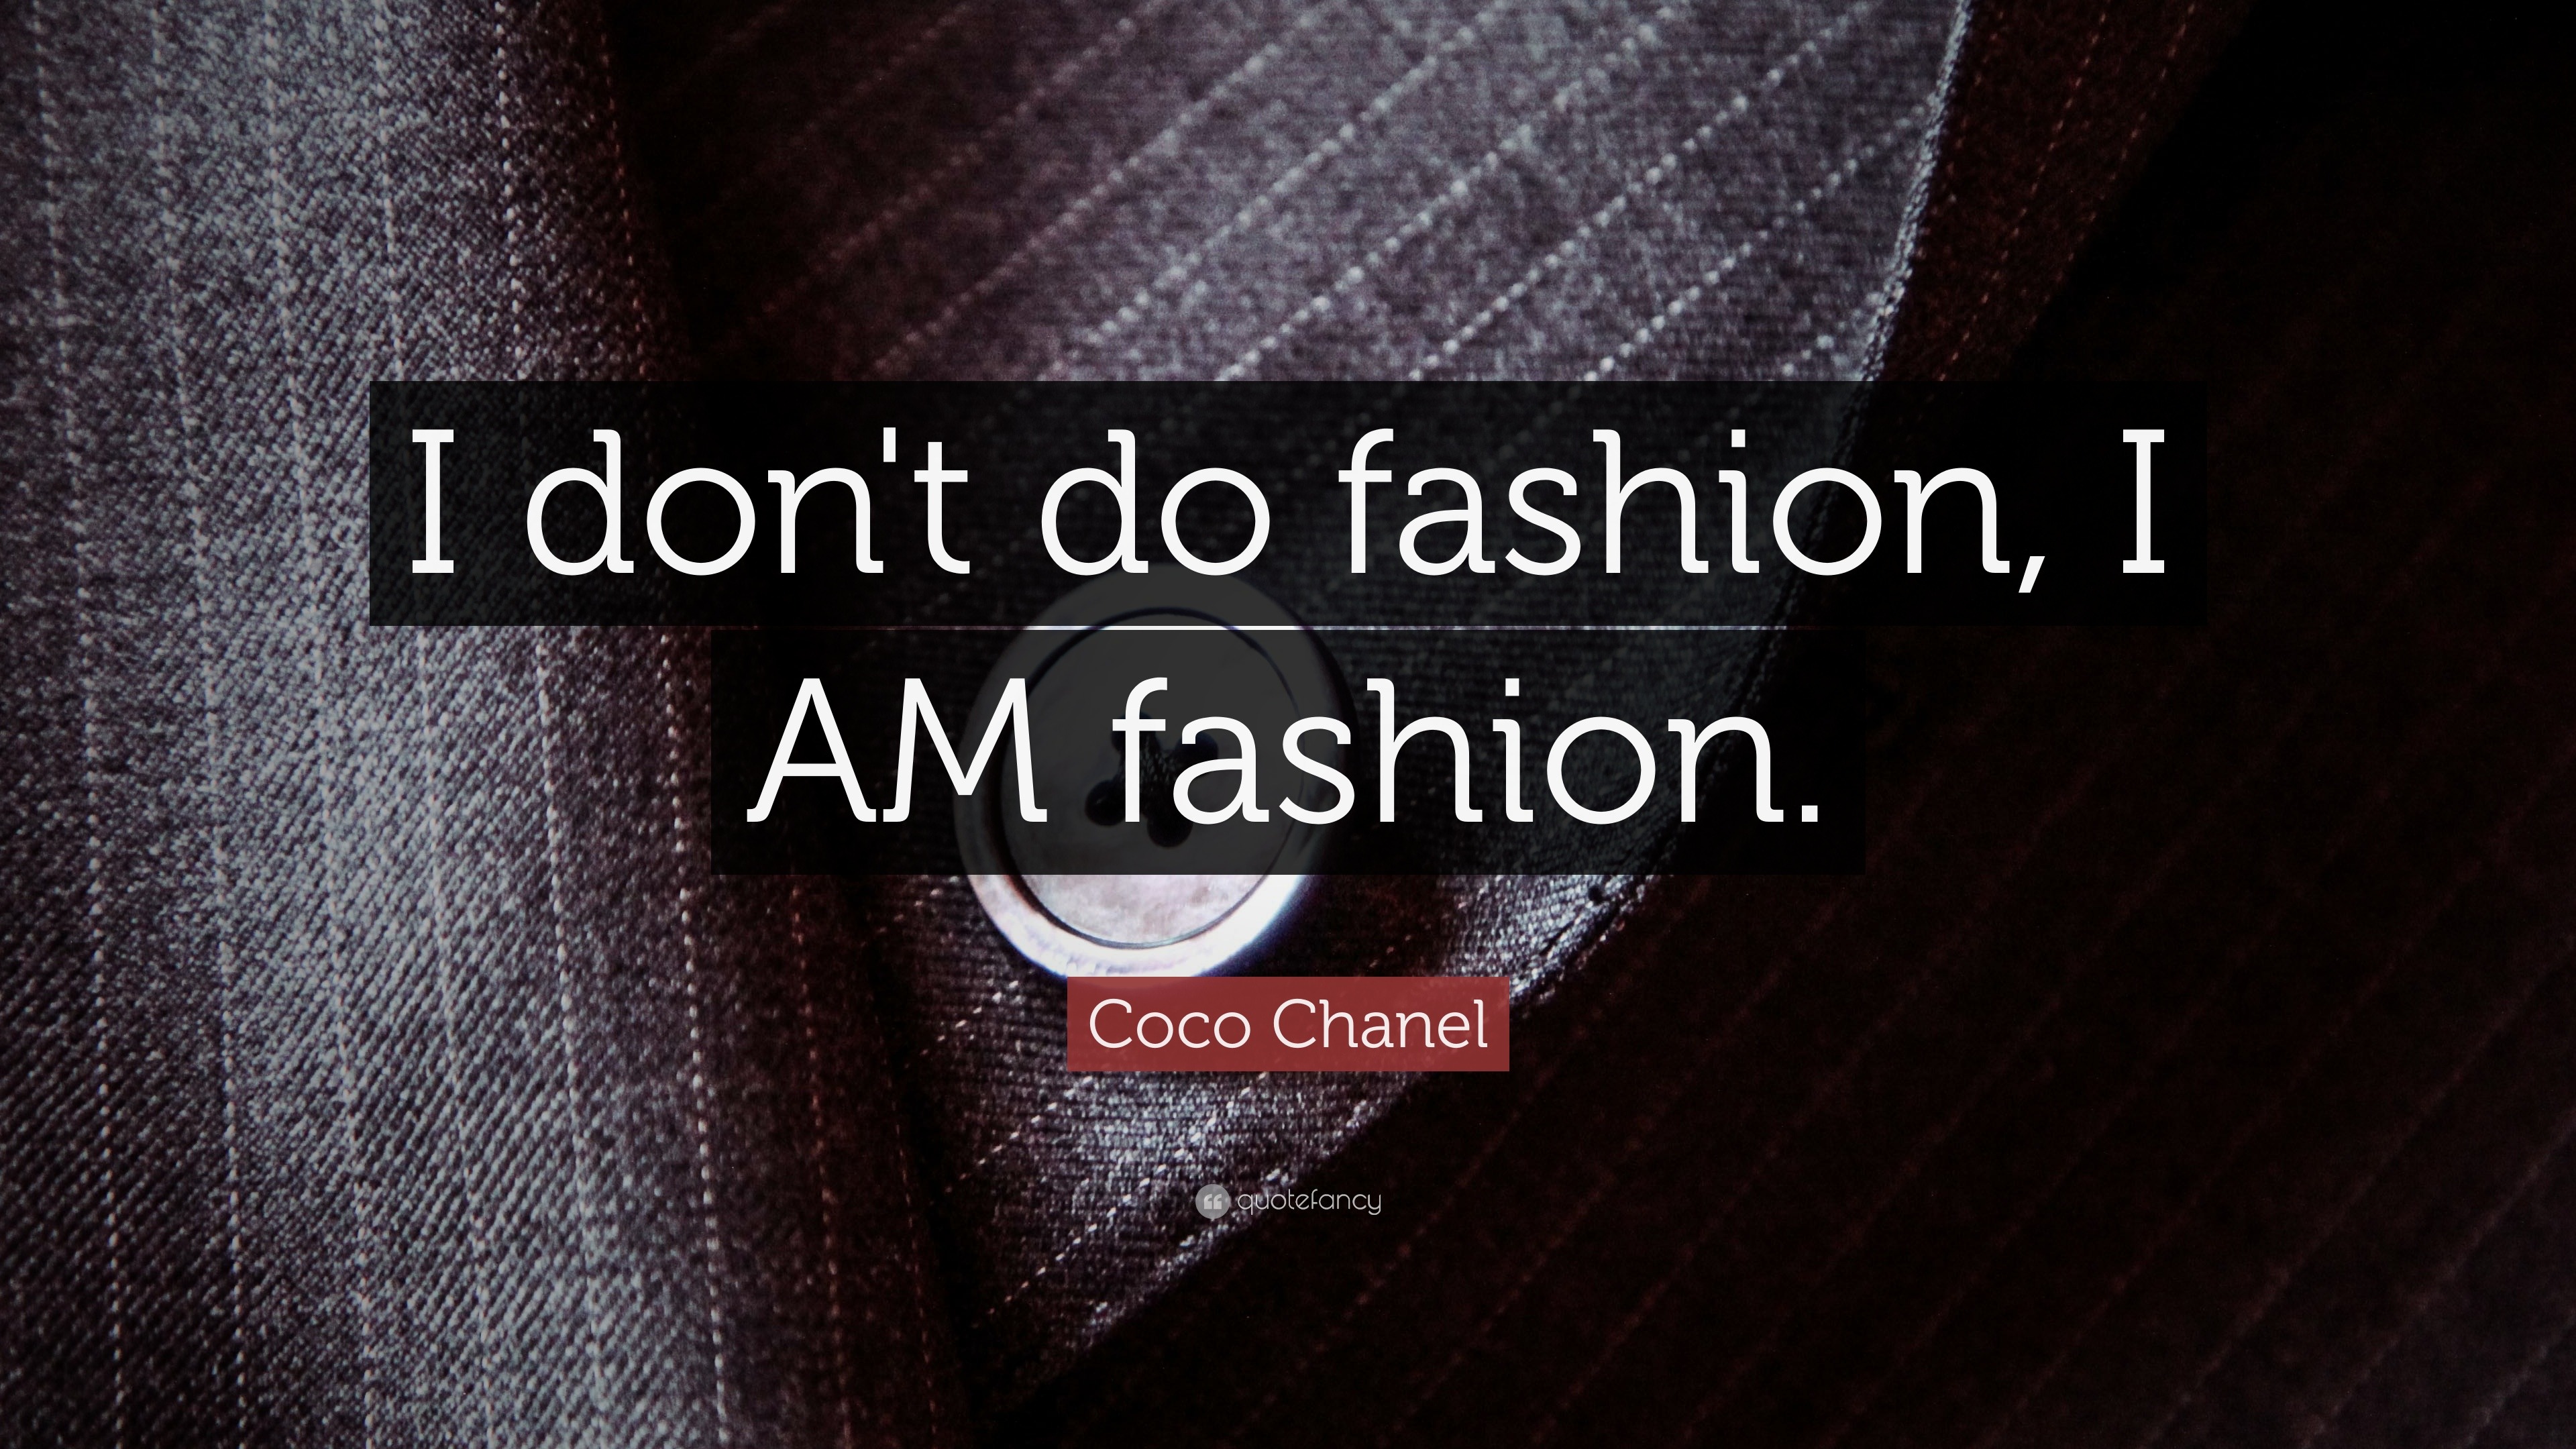 Best Coco Chanel Quotes about Fashion Life and Beauty  PixelsQuoteNet